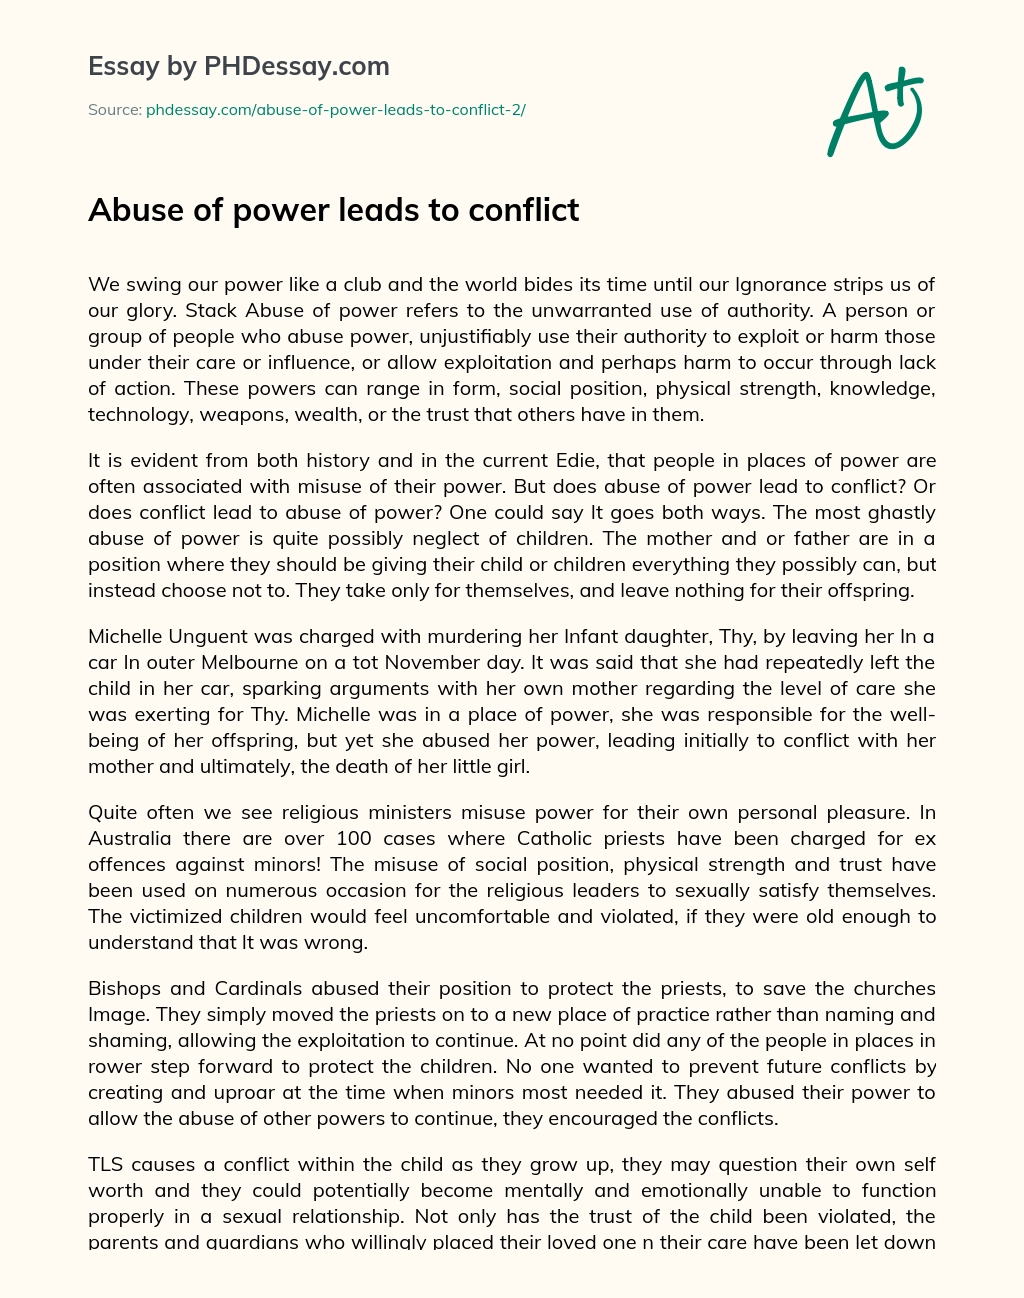 Abuse of power leads to conflict essay